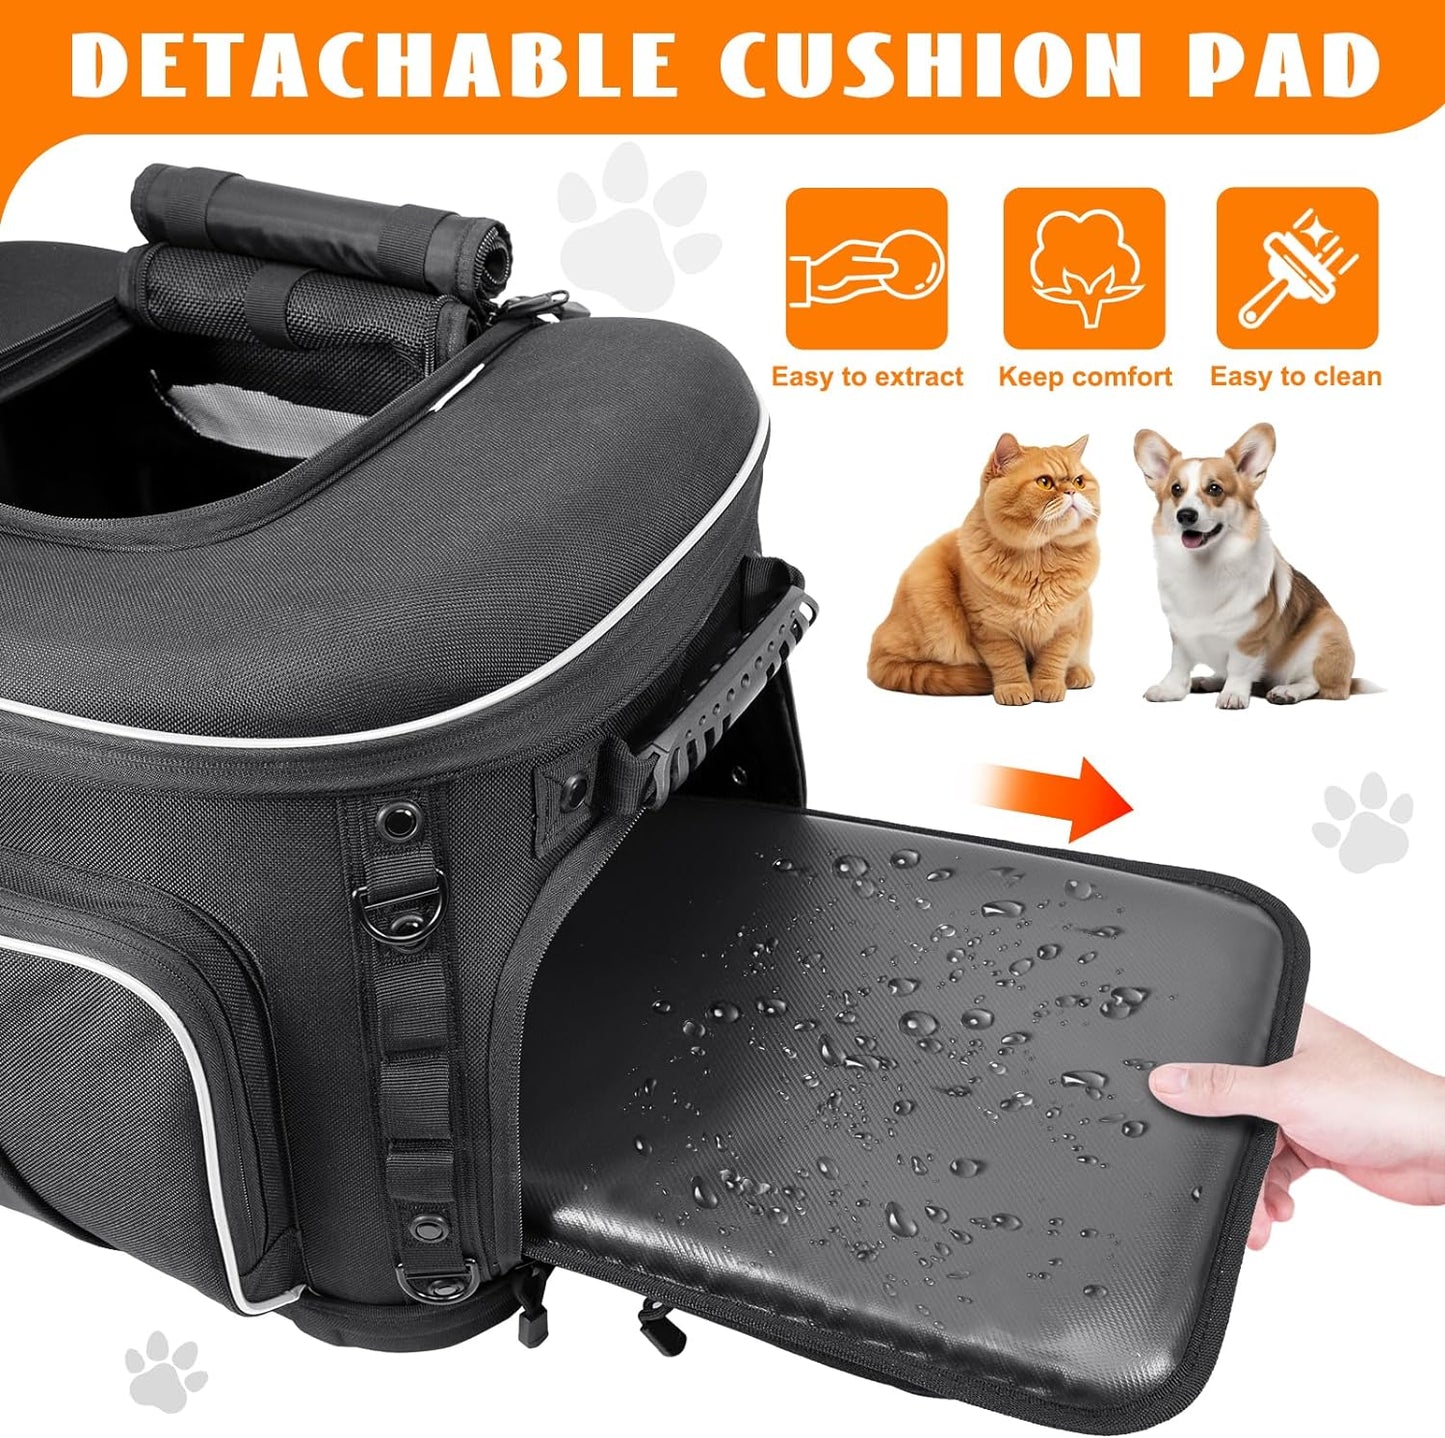 Eumti Motorcycle Dog/Cat Carrier Portable Pet Voyager Carrier Crate Travel Luggage Bags Load Capacity 20lbs for UTV/ATV Luggage Rack or Harley Touring Trike Model